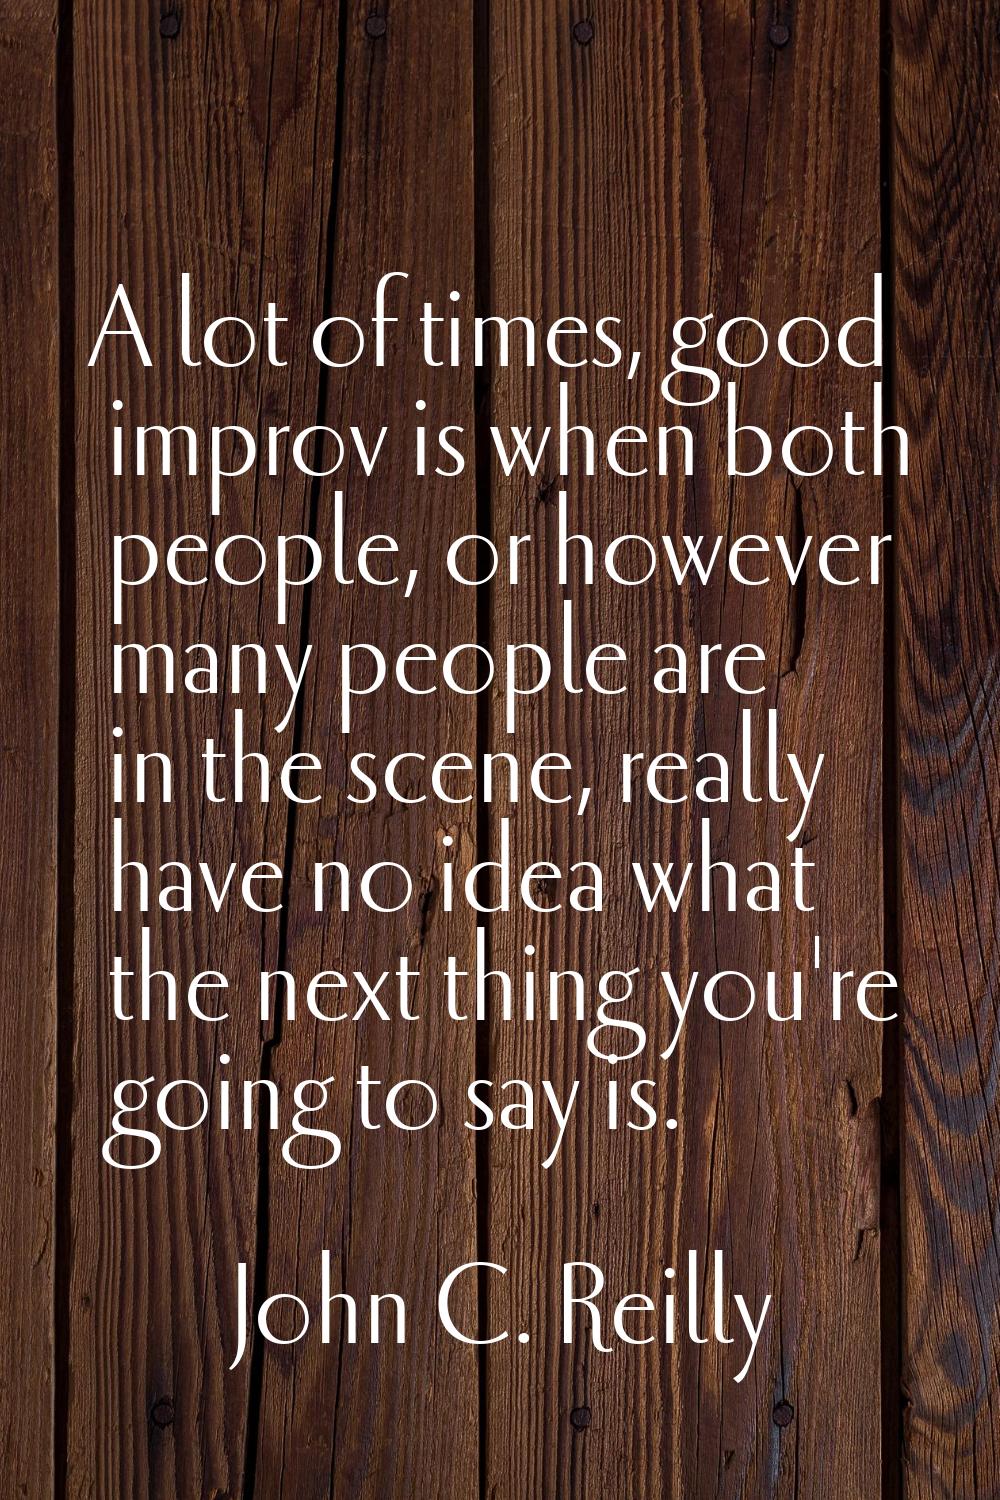 A lot of times, good improv is when both people, or however many people are in the scene, really ha